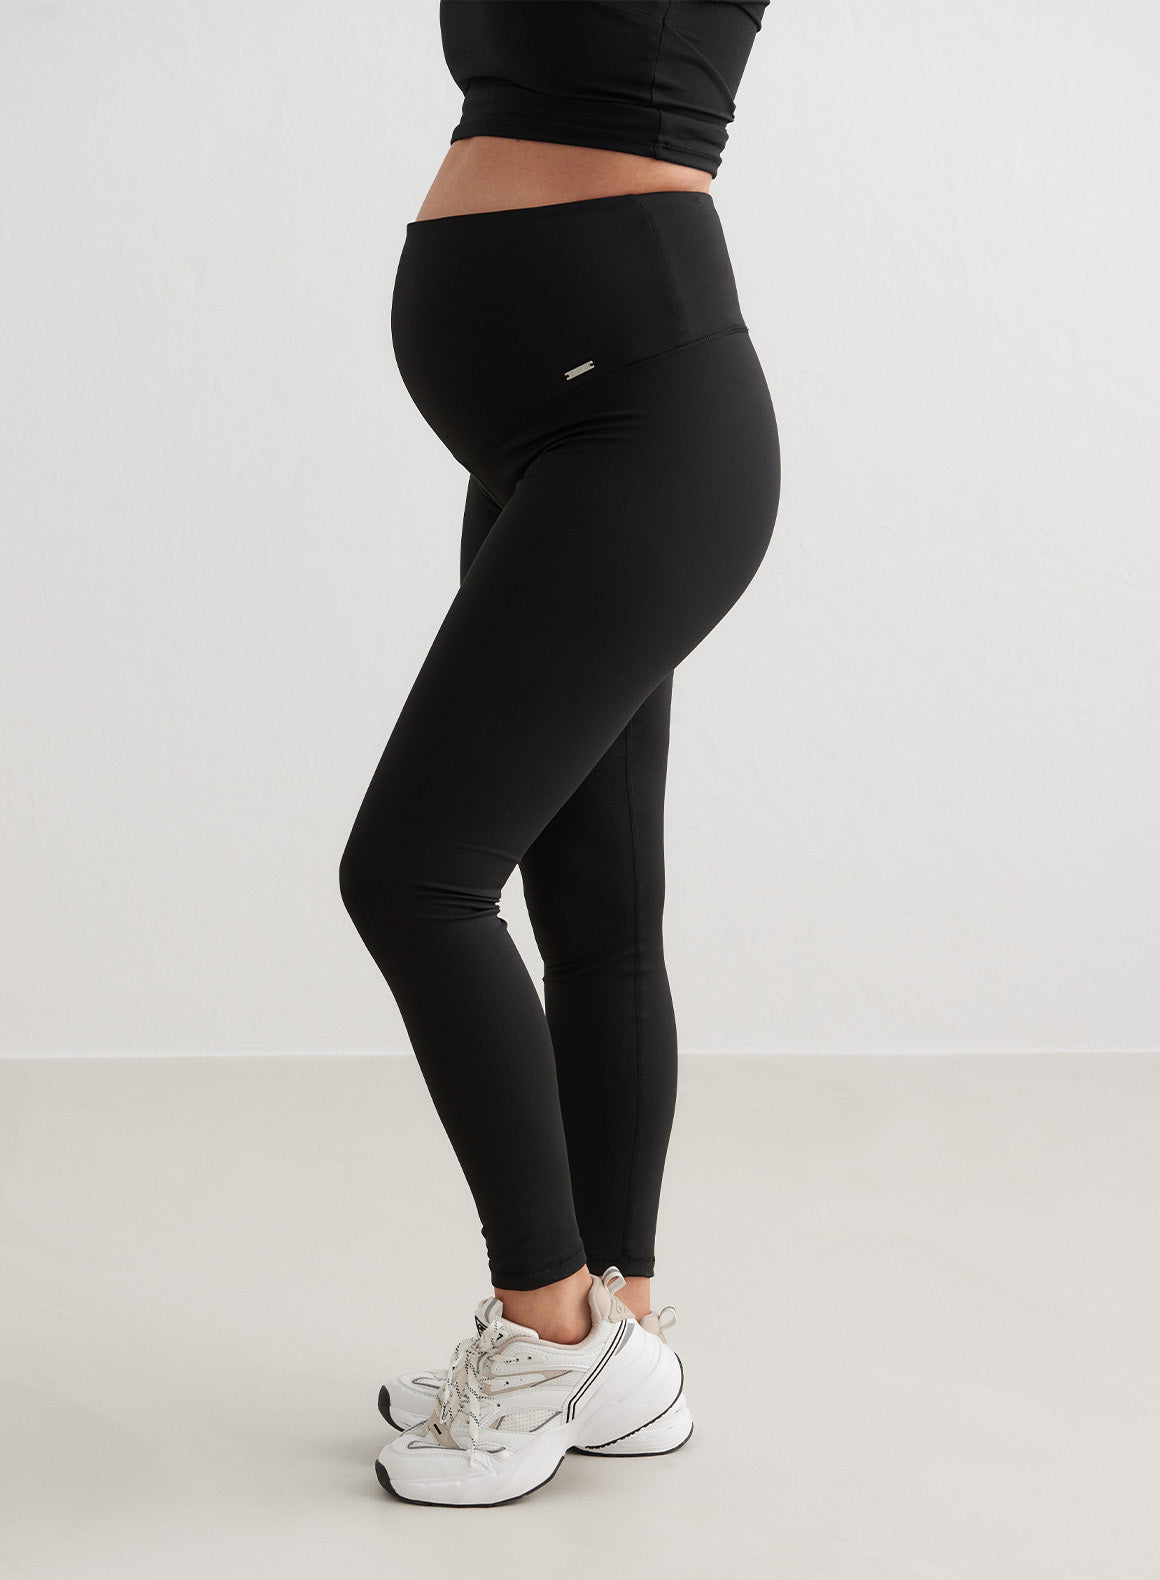 My first time trying on maternity tights at 30 weeks! @aimn